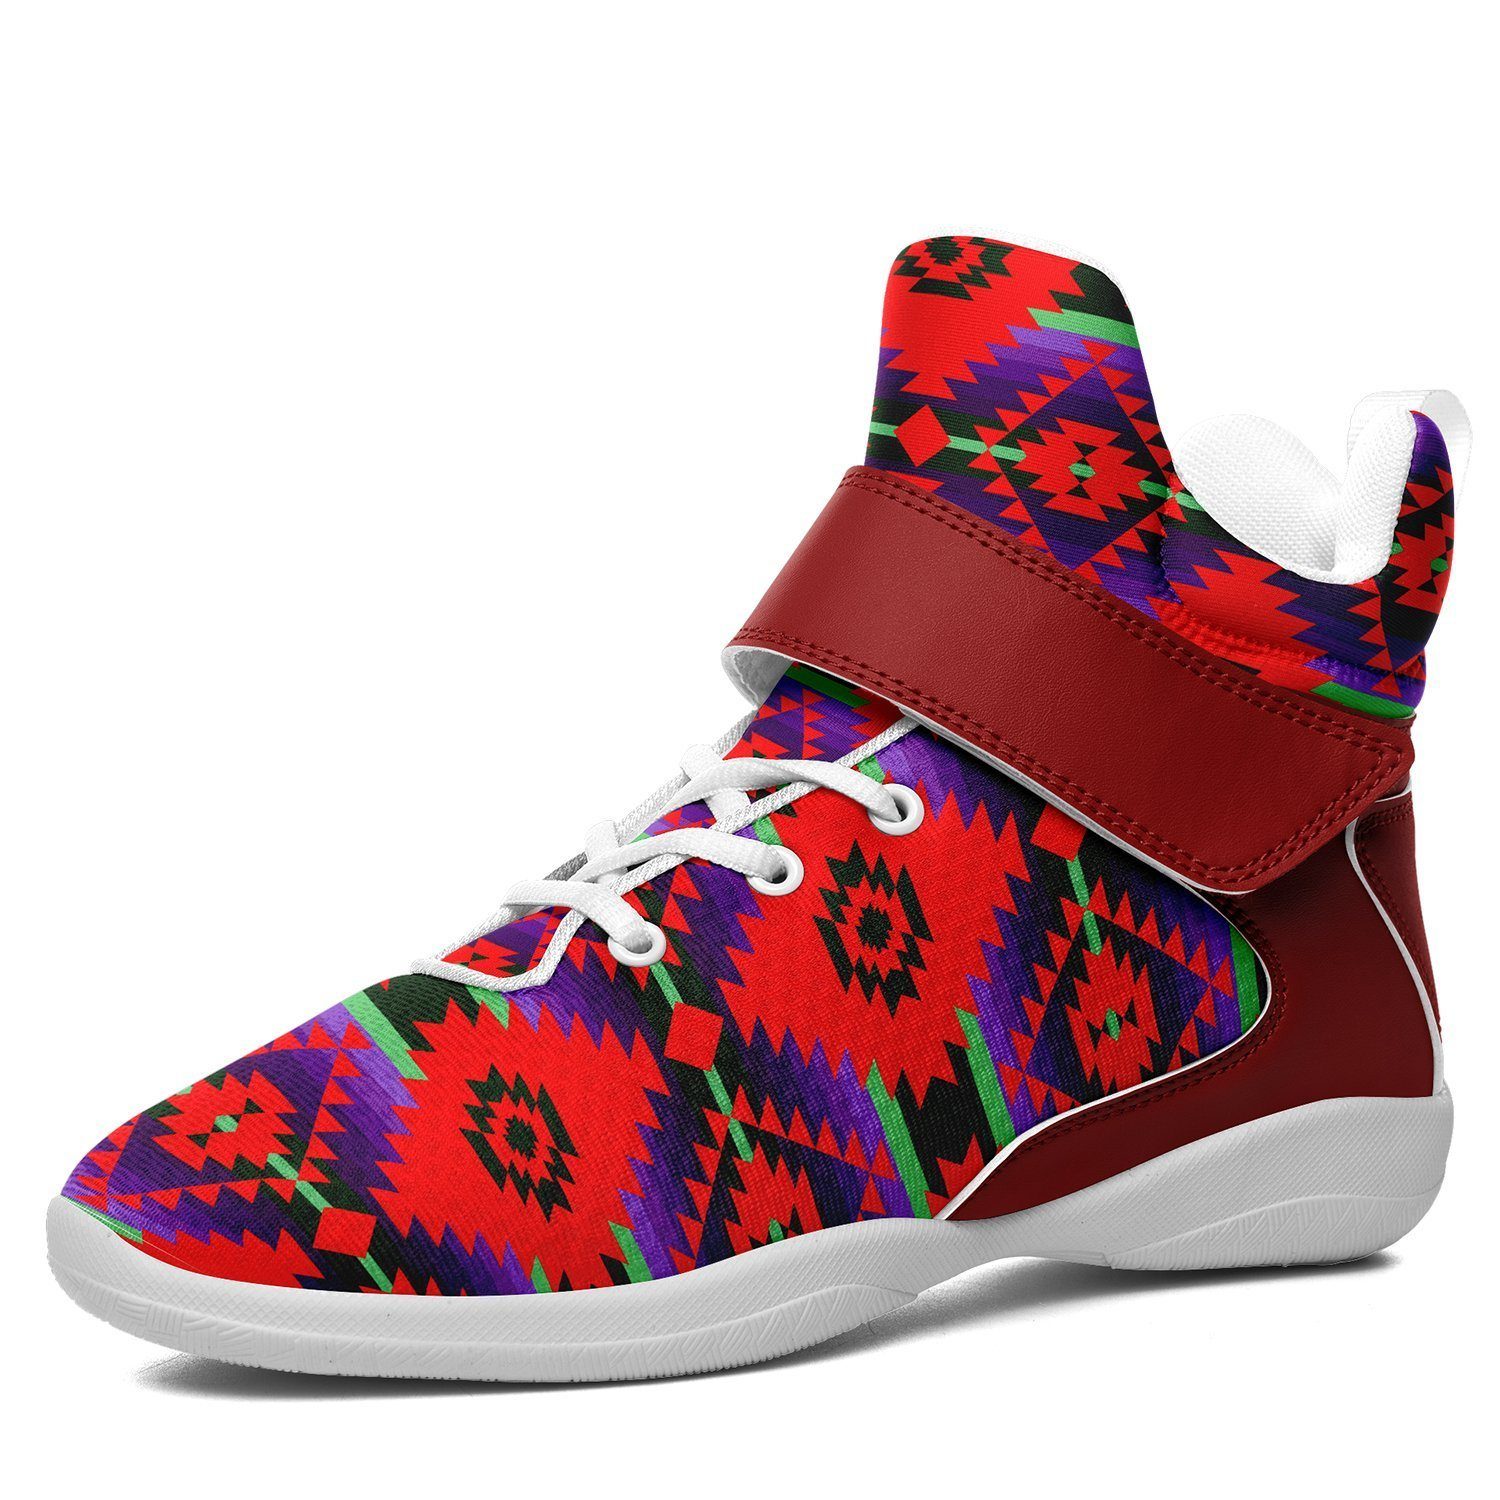 Cree Confederacy Chicken Dance Ipottaa Basketball / Sport High Top Shoes - White Sole 49 Dzine US Men 7 / EUR 40 White Sole with Red Strap 